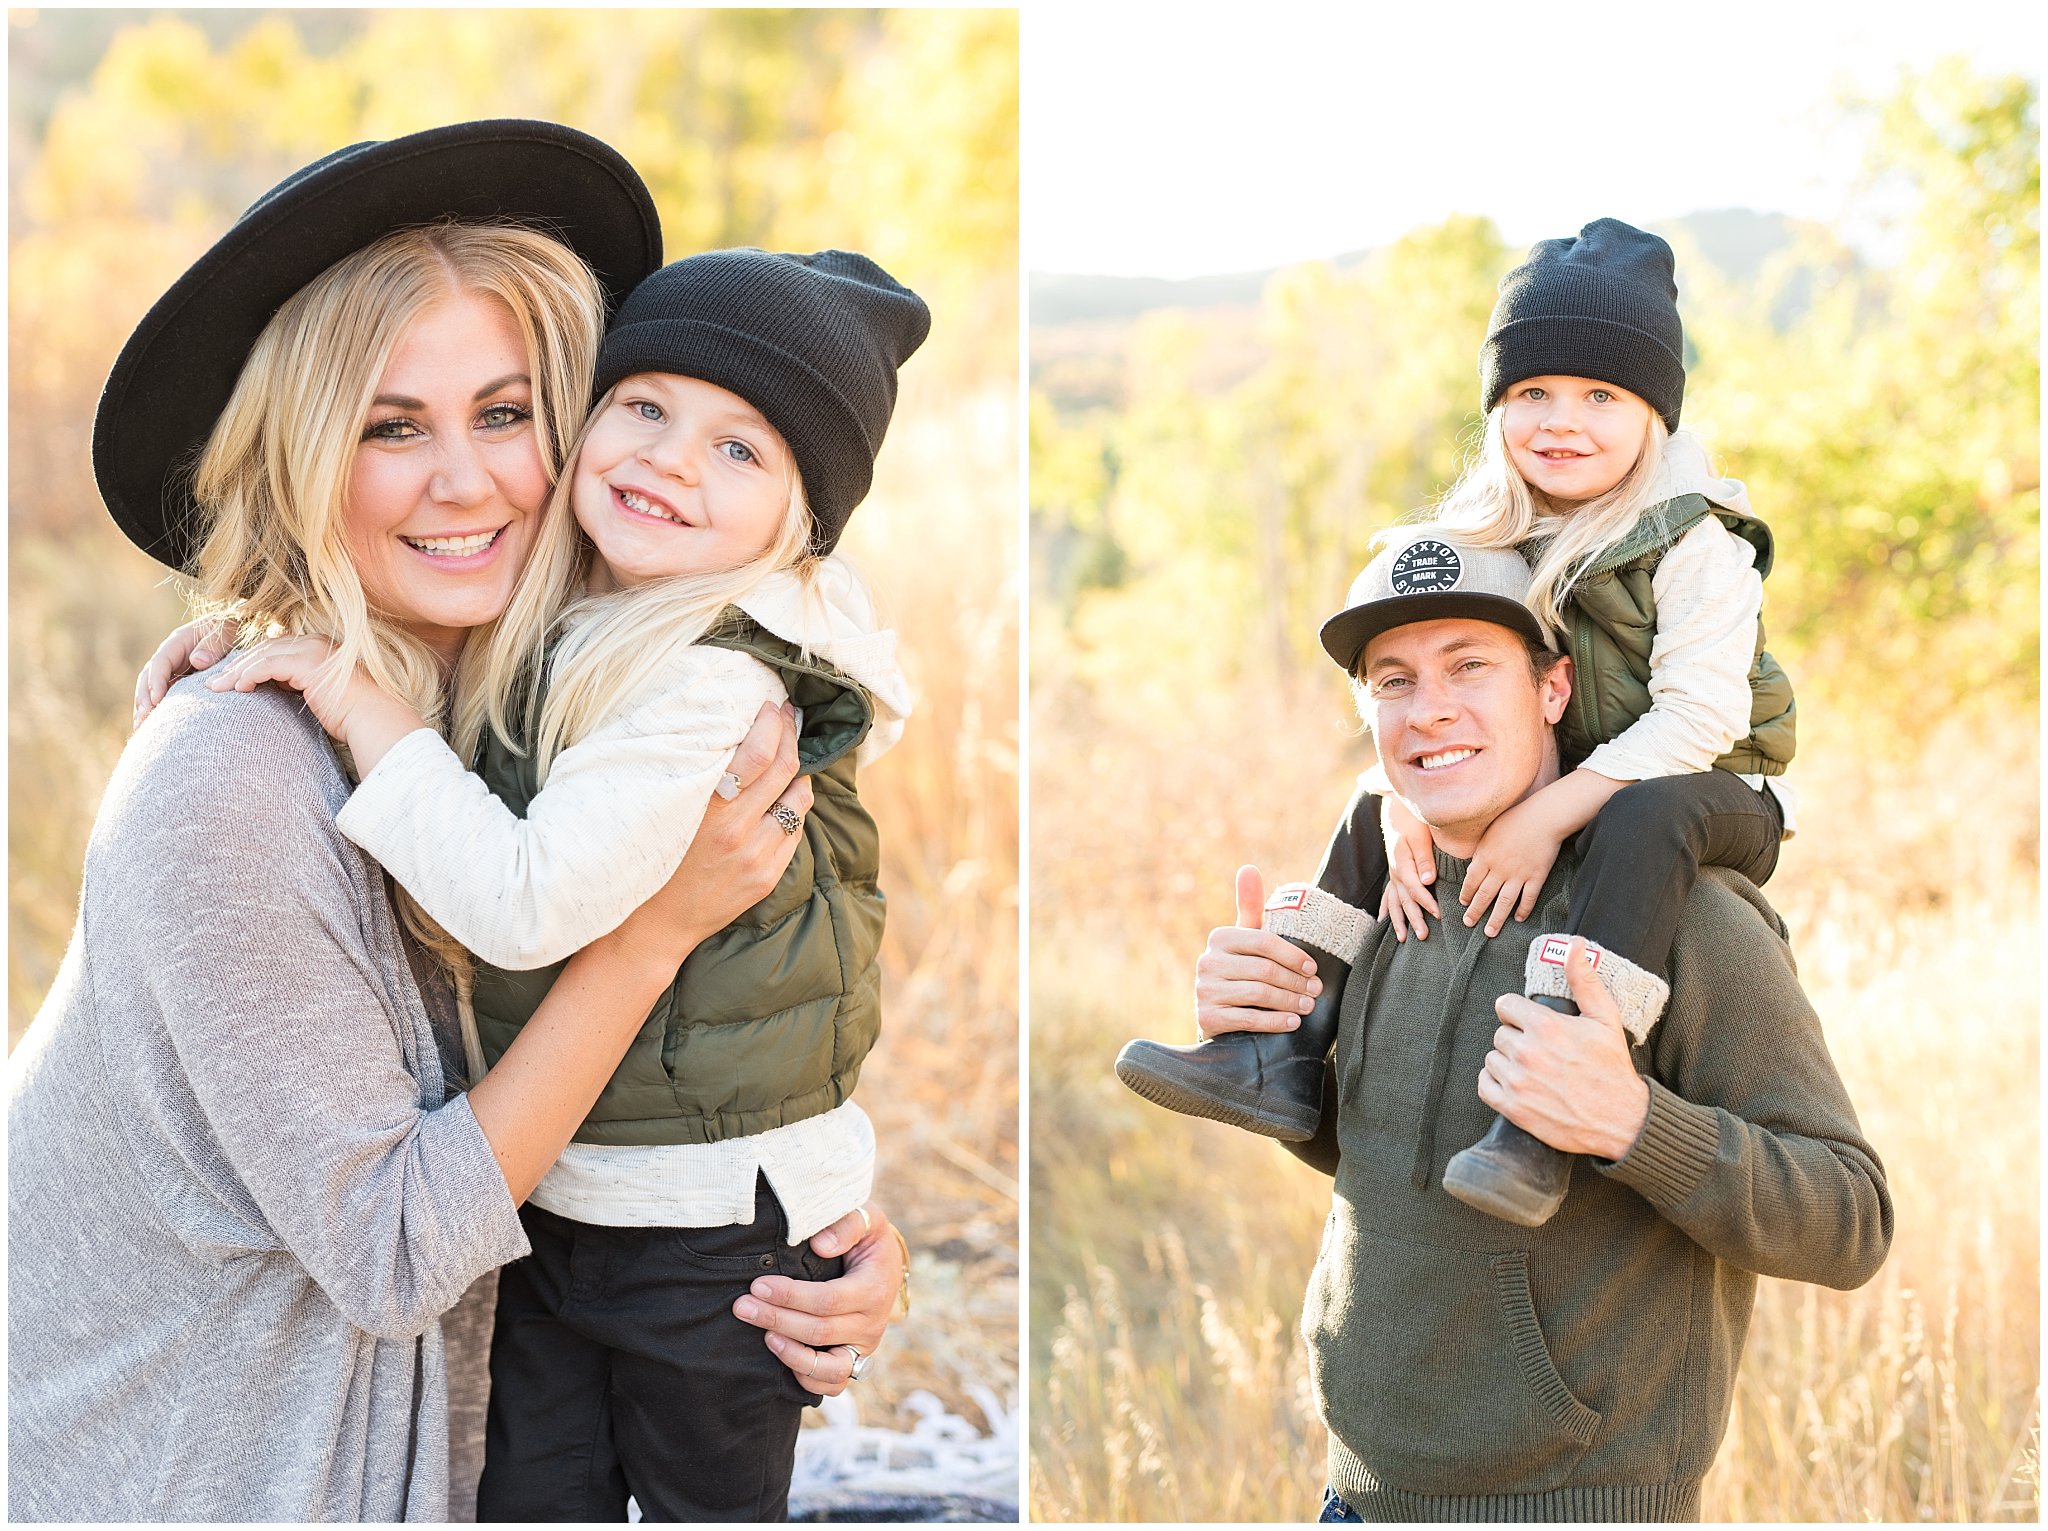 Grey, green and black style for fall family pictures | Fall Family Pictures in the Mountains | Snowbasin, Utah | Jessie and Dallin